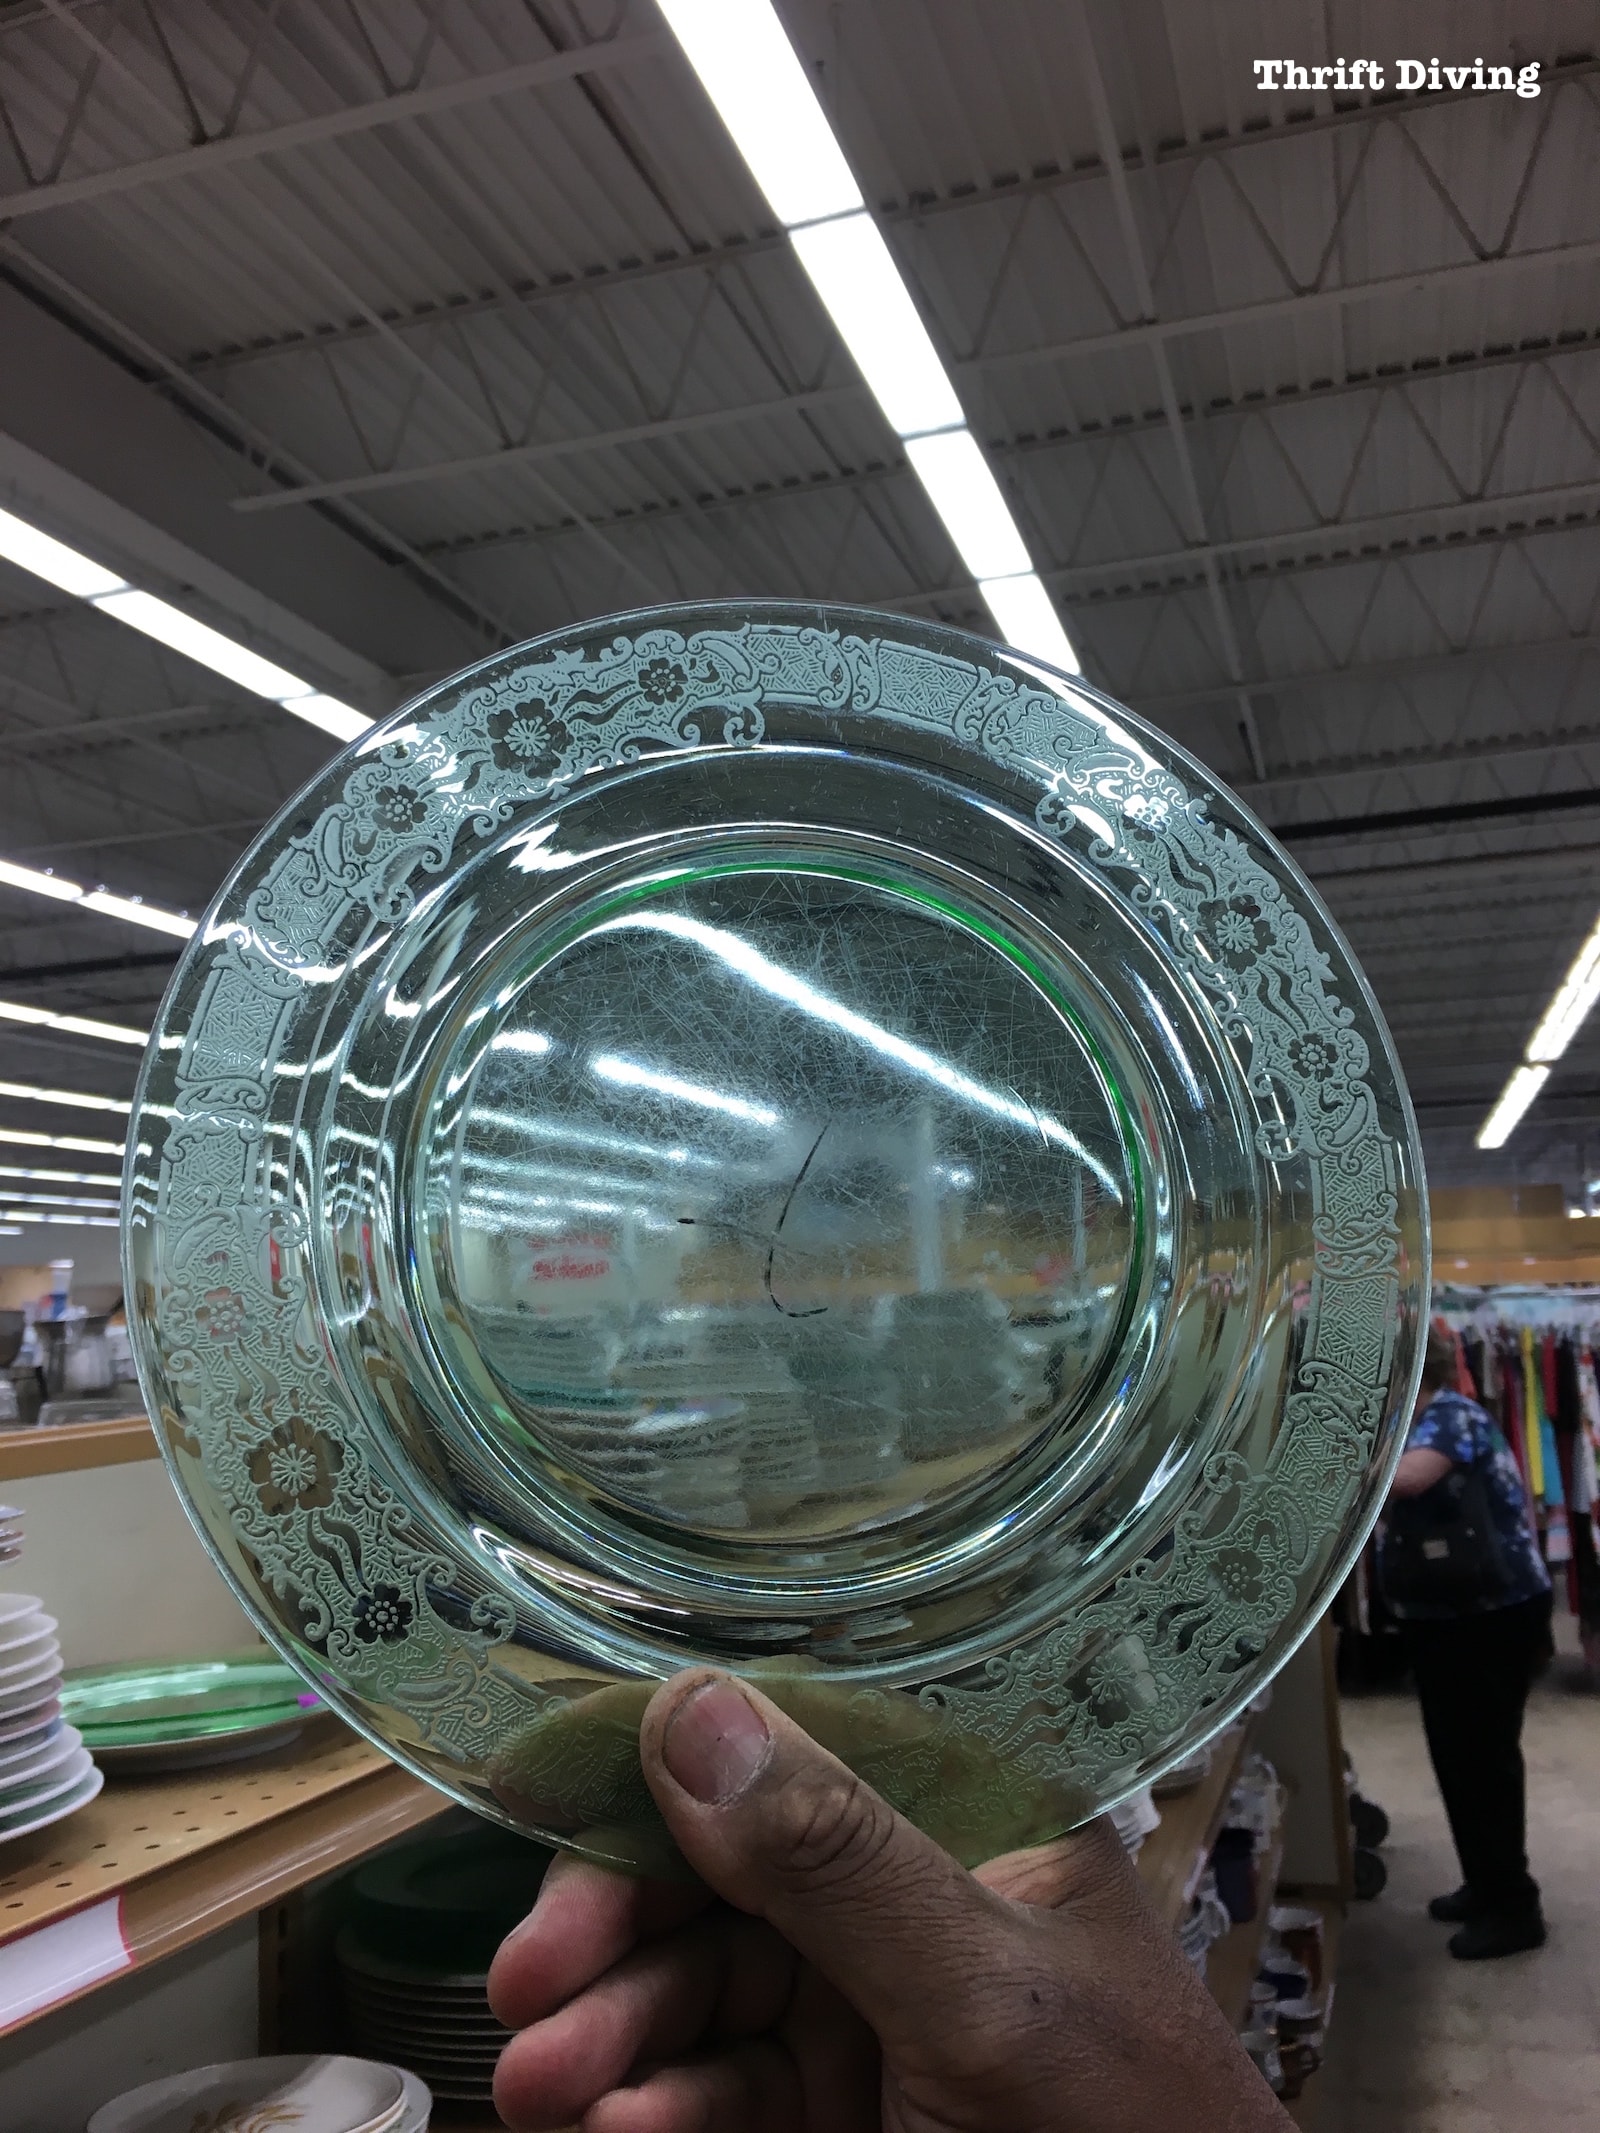 How to Shop Thrift Stores - Etched glass plates. - Thrift Diving